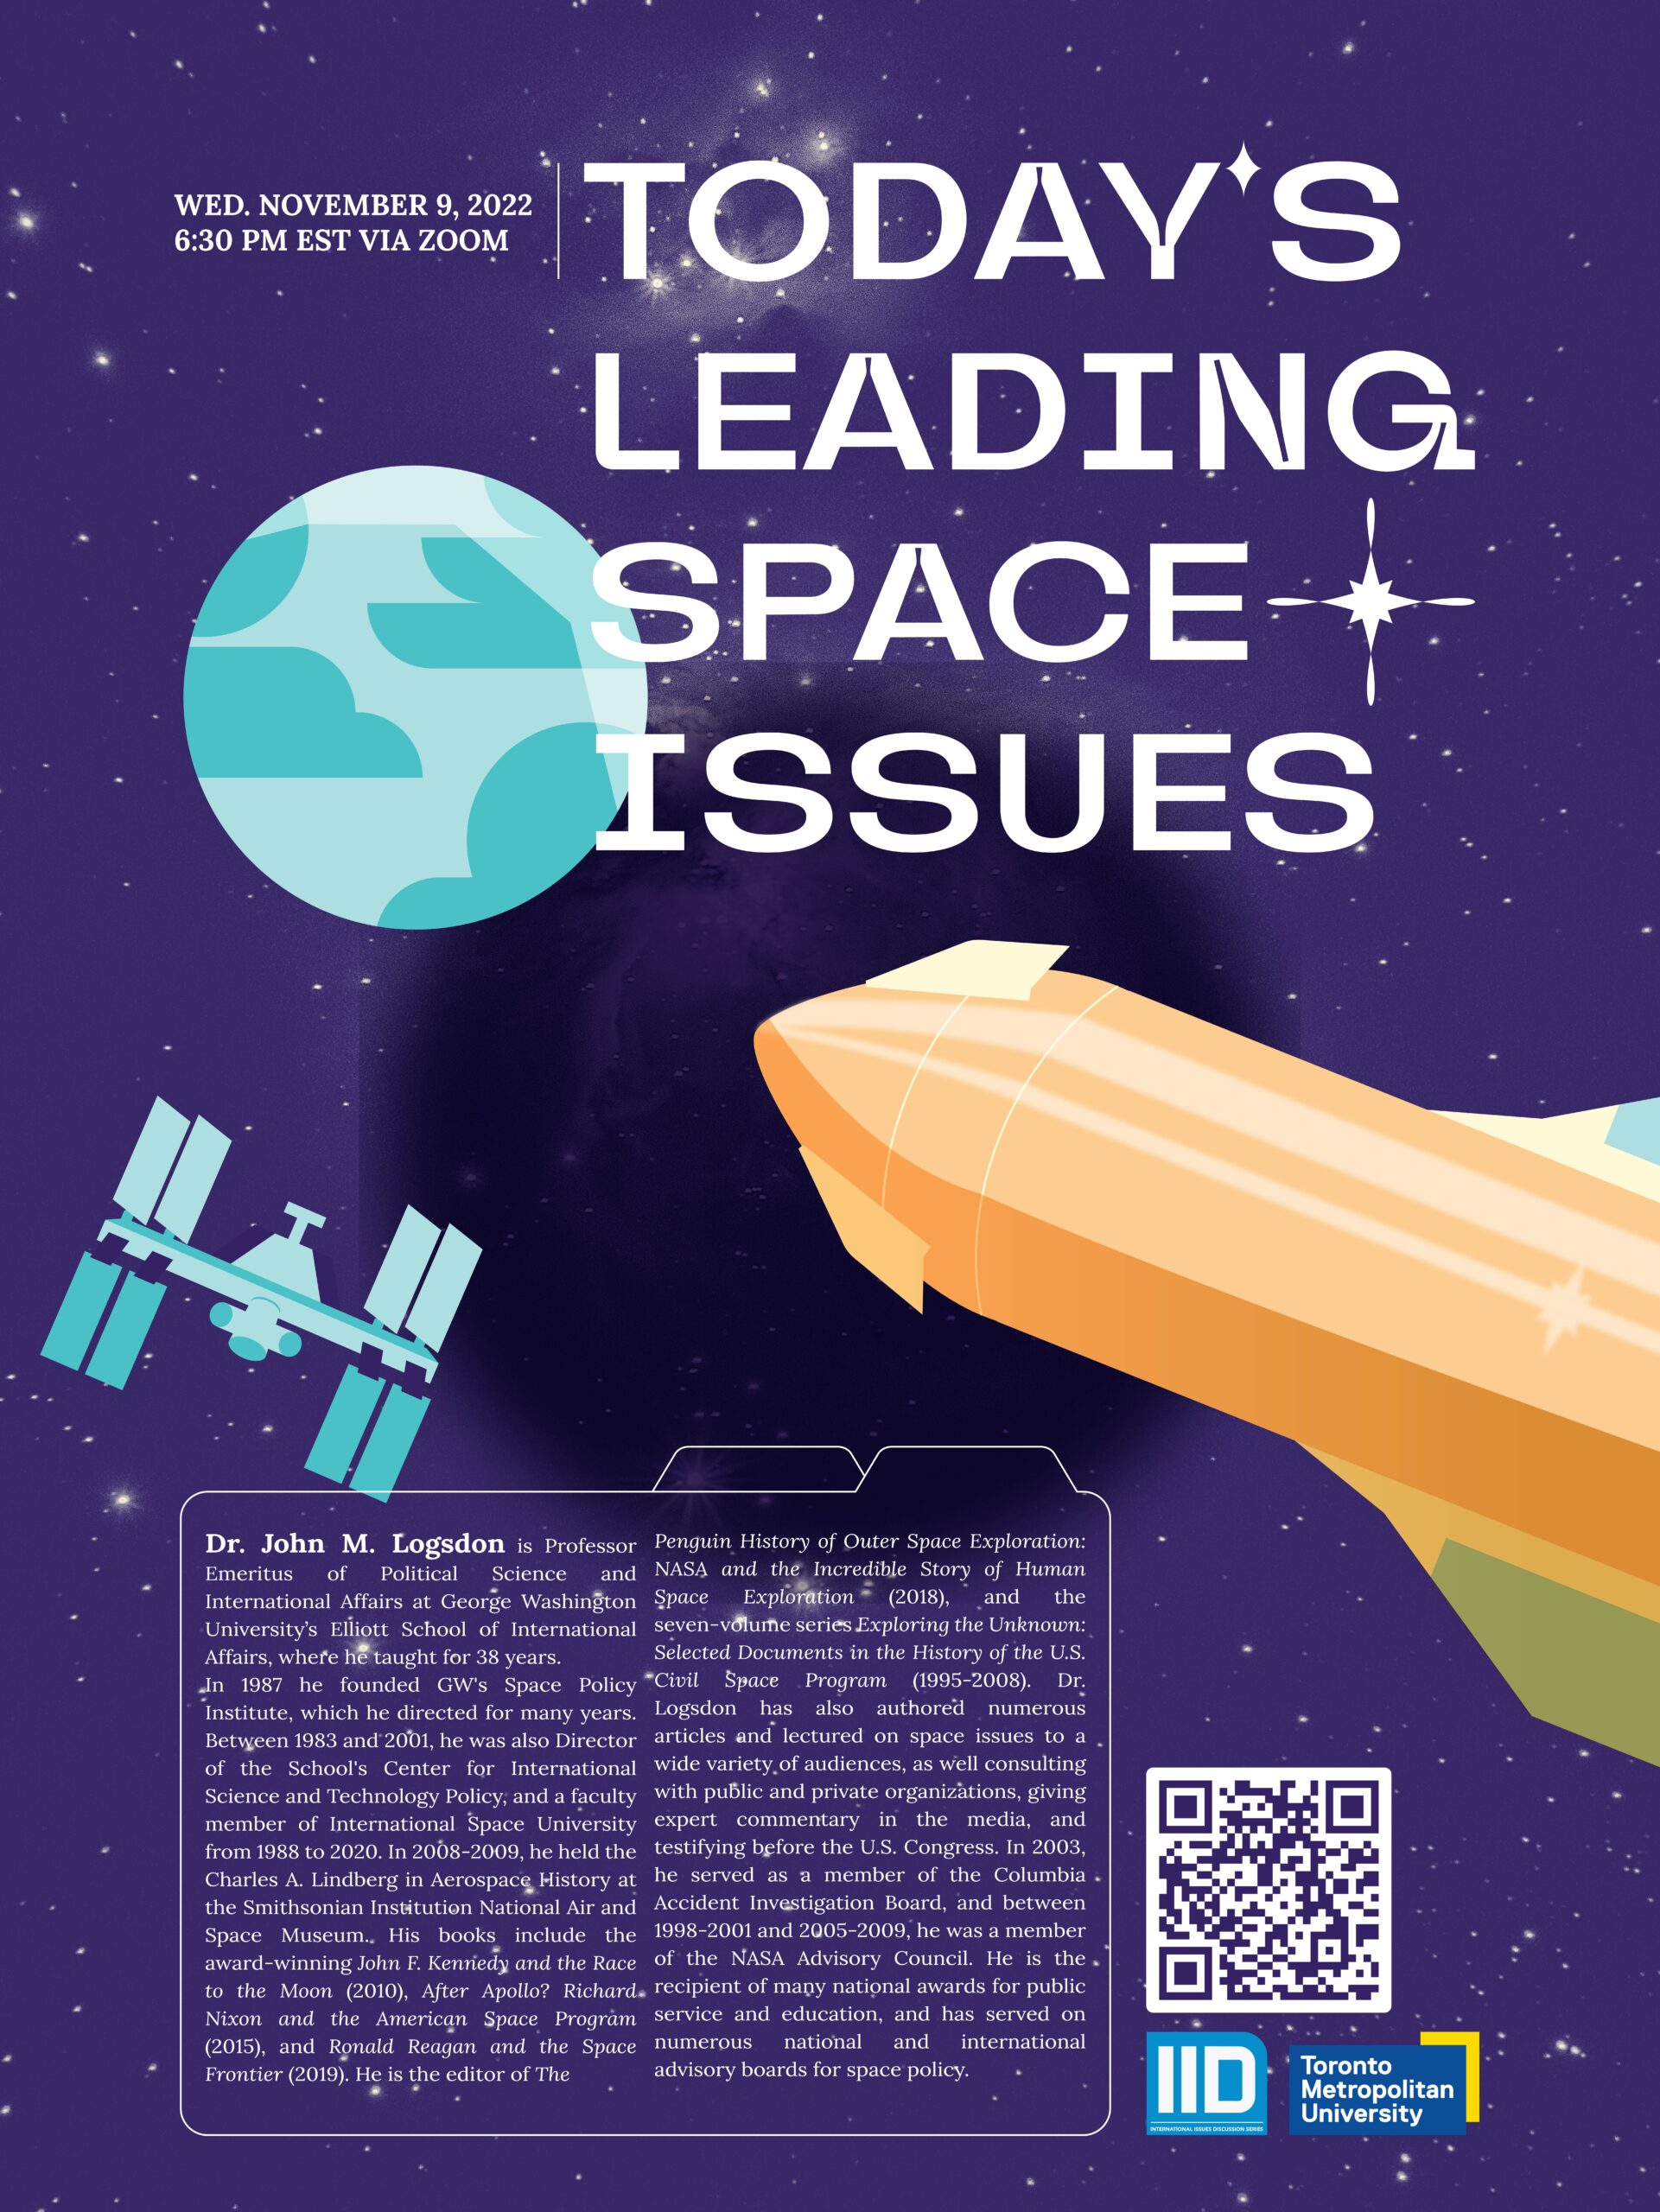 Today’s Leading Space Issues